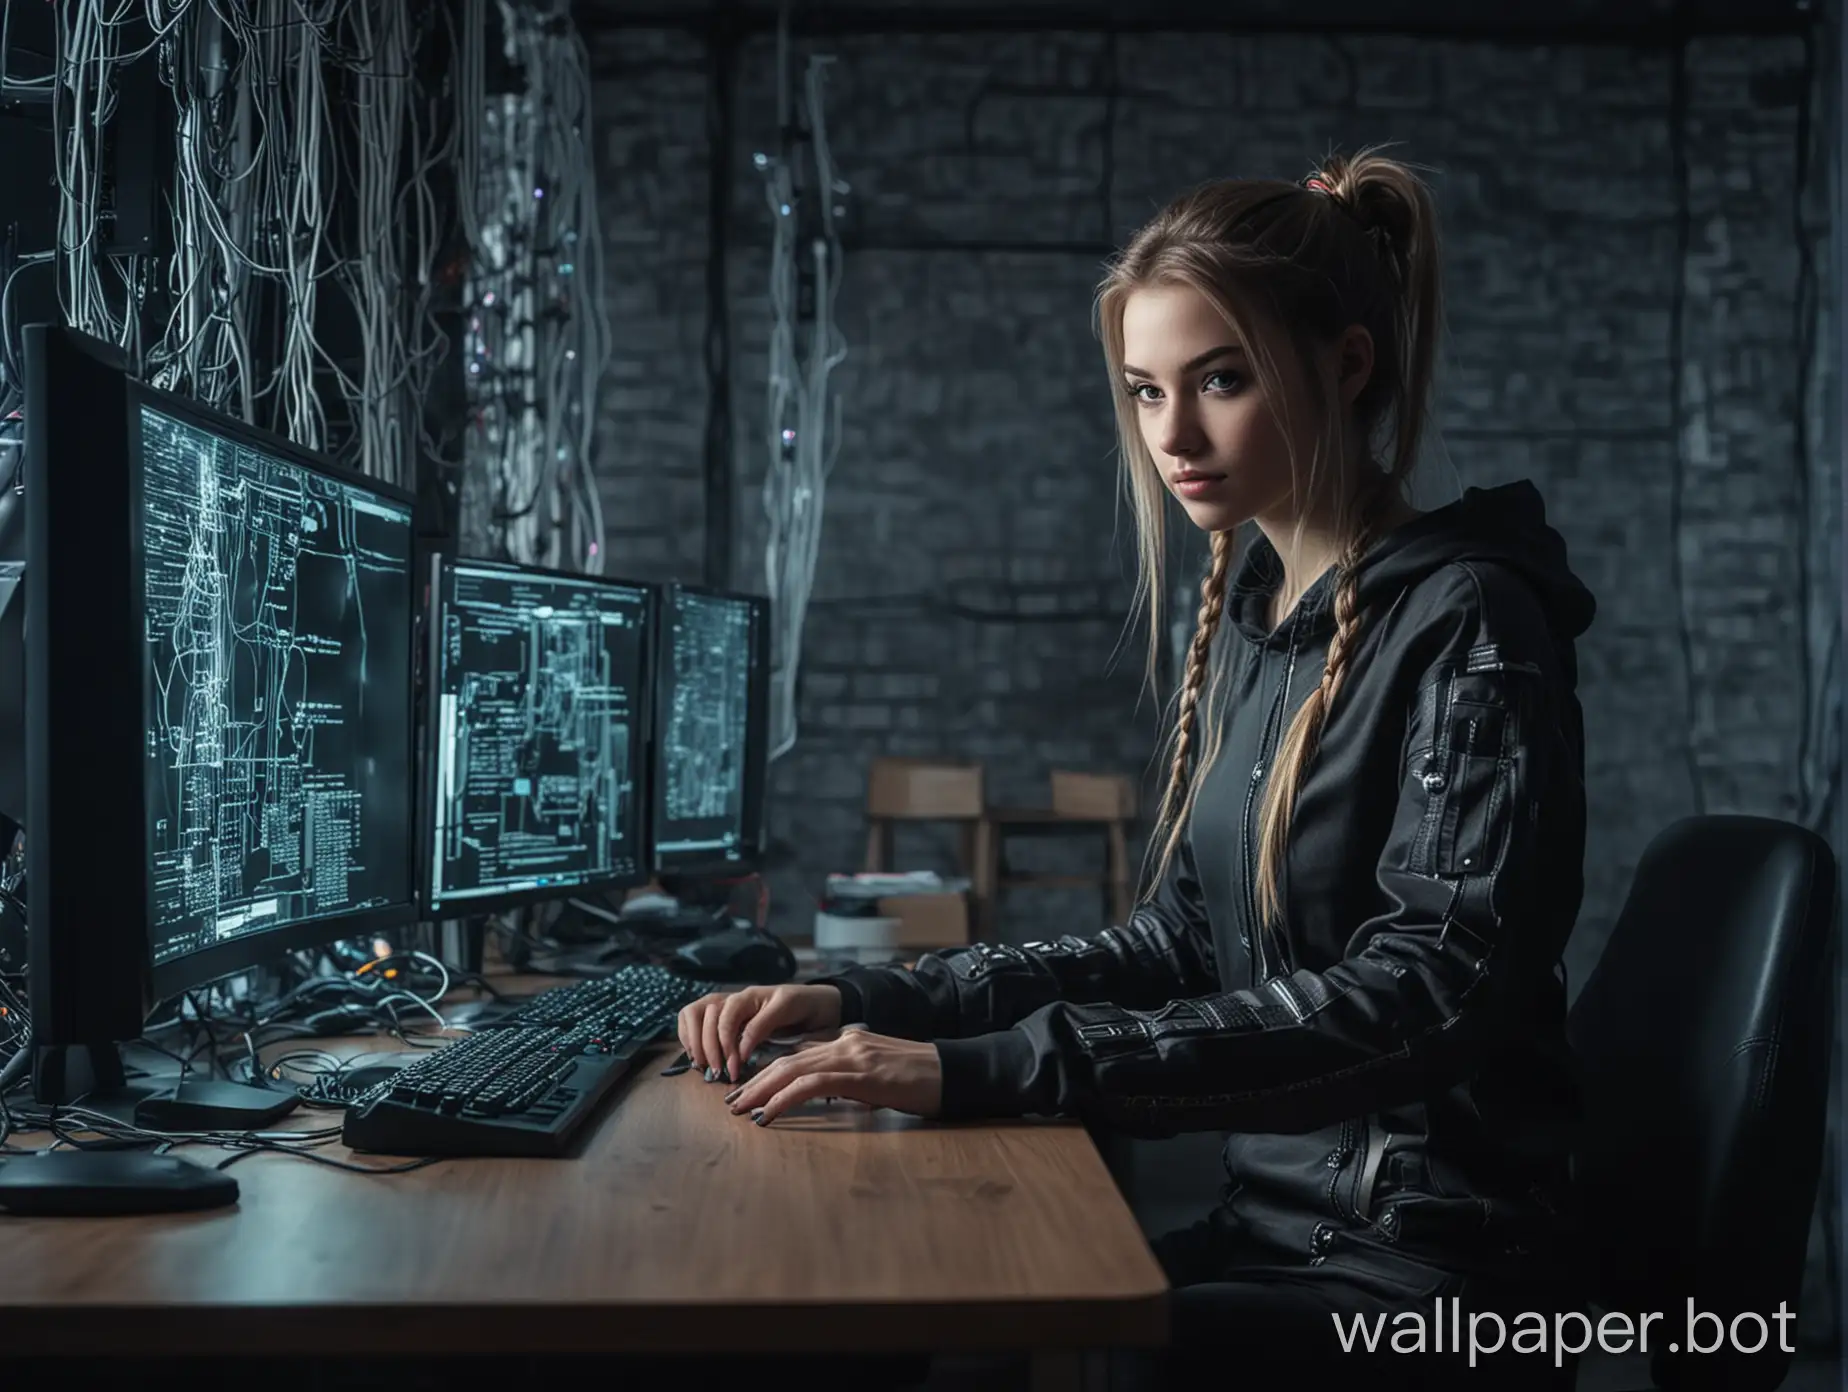 Futuristic-Cyber-Girl-Hacker-in-Dimly-Lit-Room-with-Glowing-Monitors